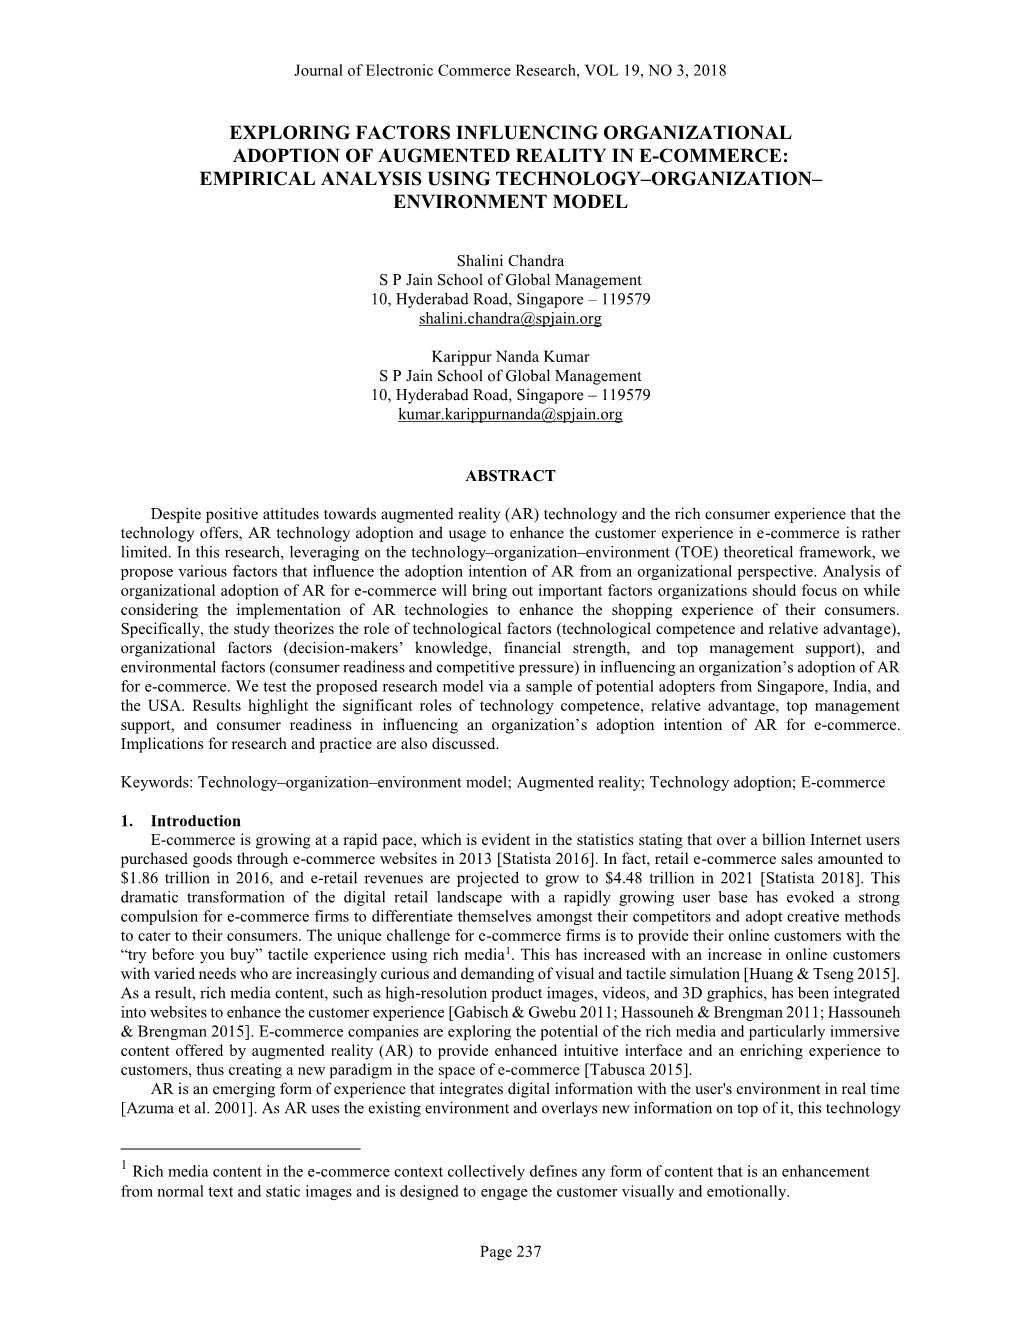 Exploring Factors Influencing Organizational Adoption of Augmented Reality in E-Commerce: Empirical Analysis Using Technology–Organization– Environment Model